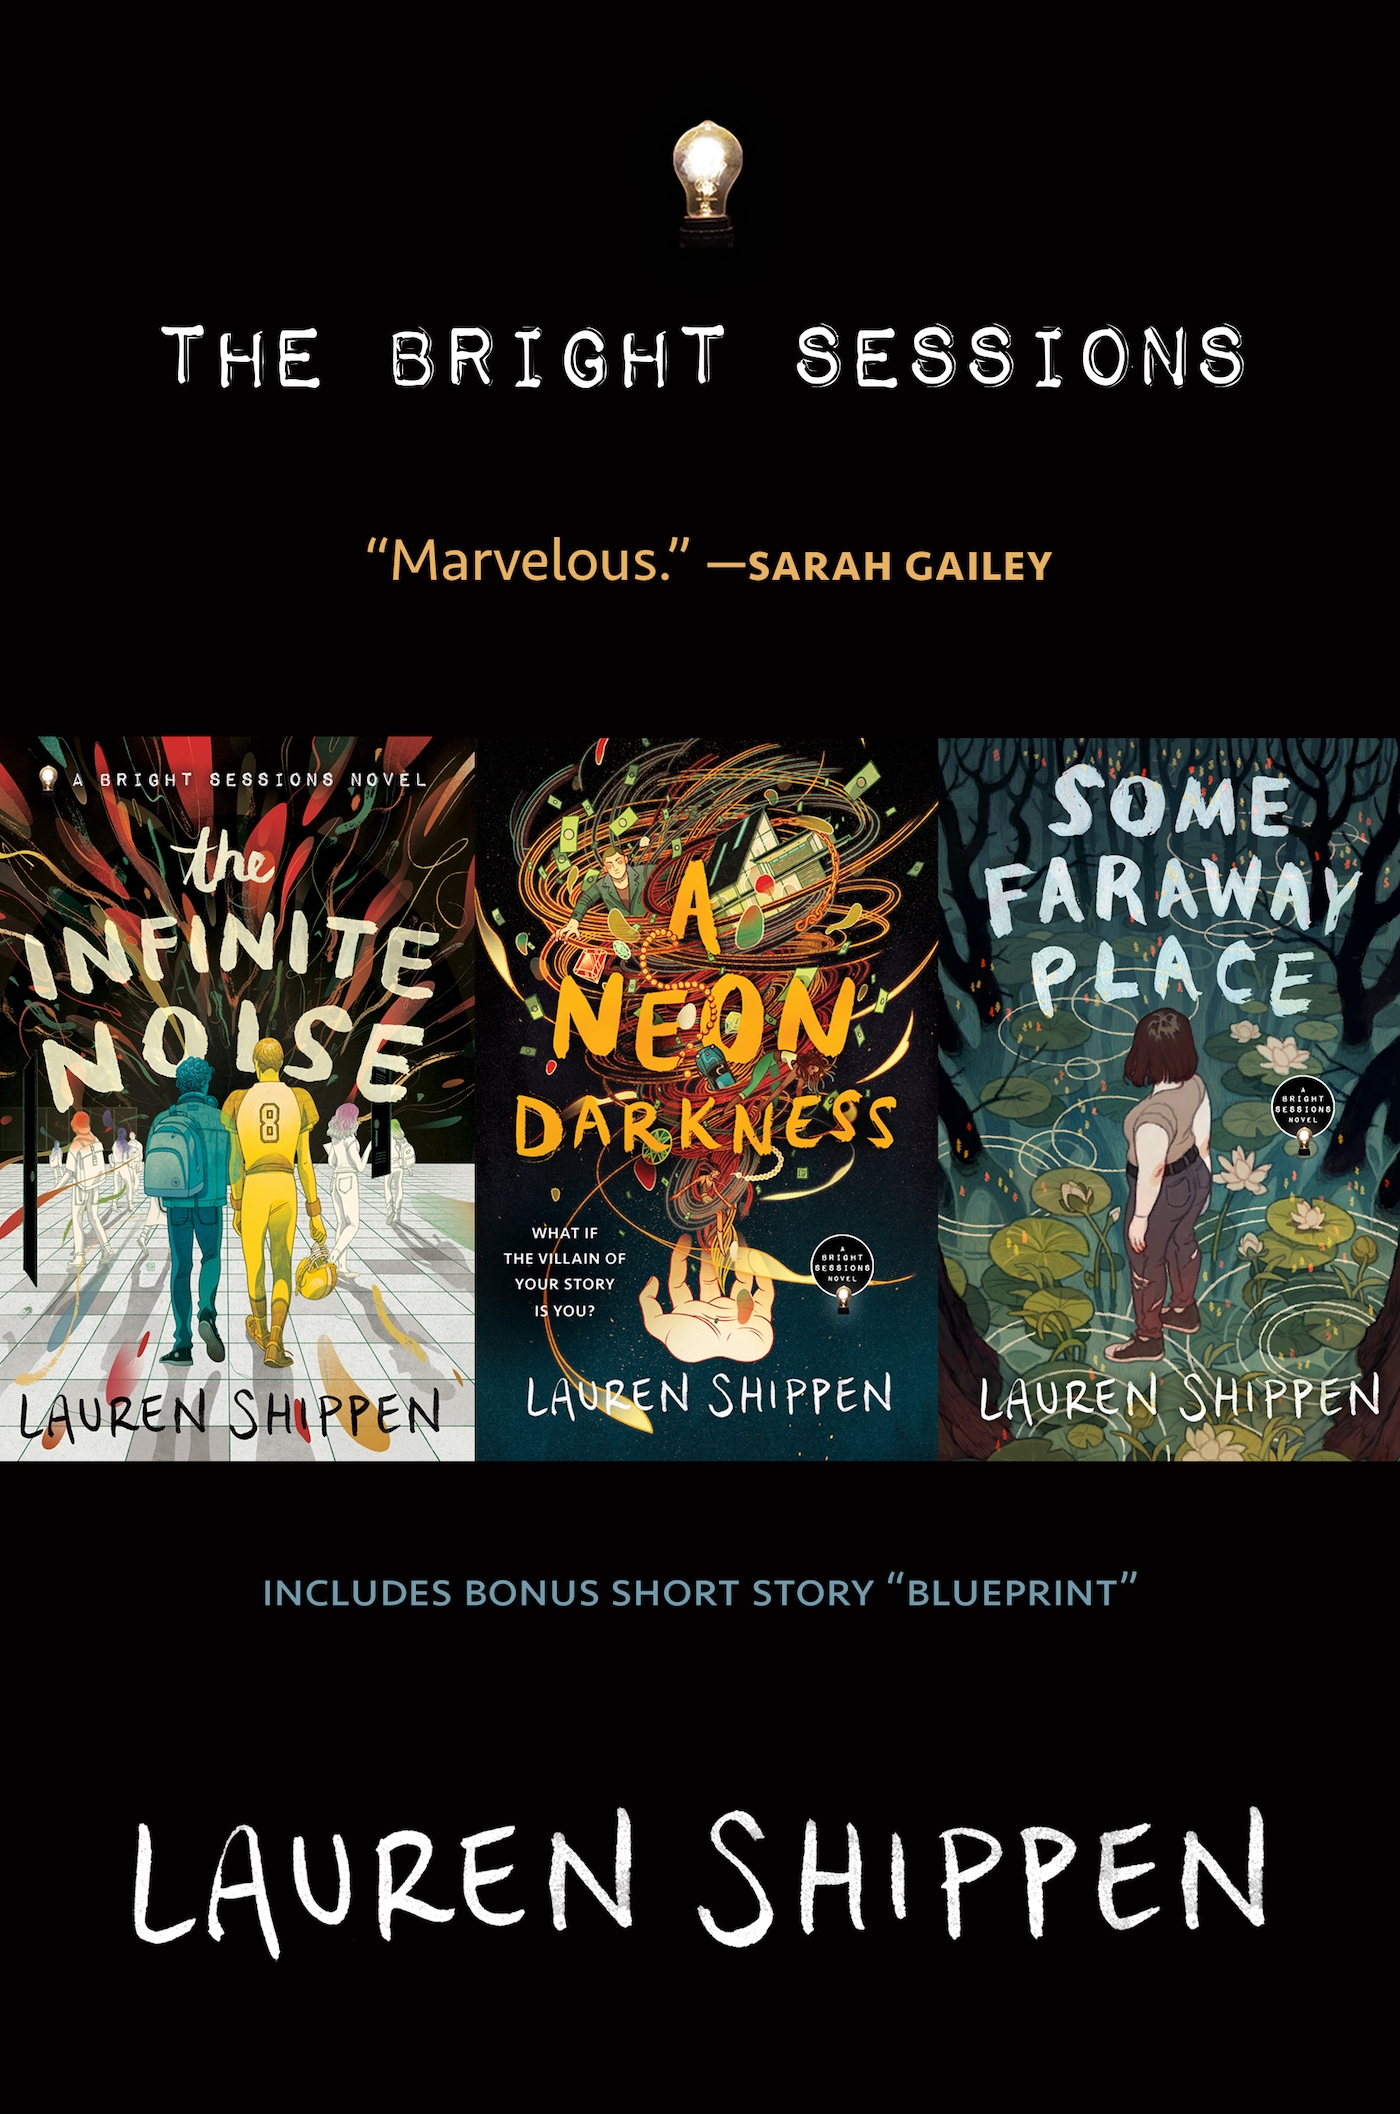 The Bright Sessions : The Infinite Noise, A Neon Darkness, Some Faraway Place by Lauren Shippen